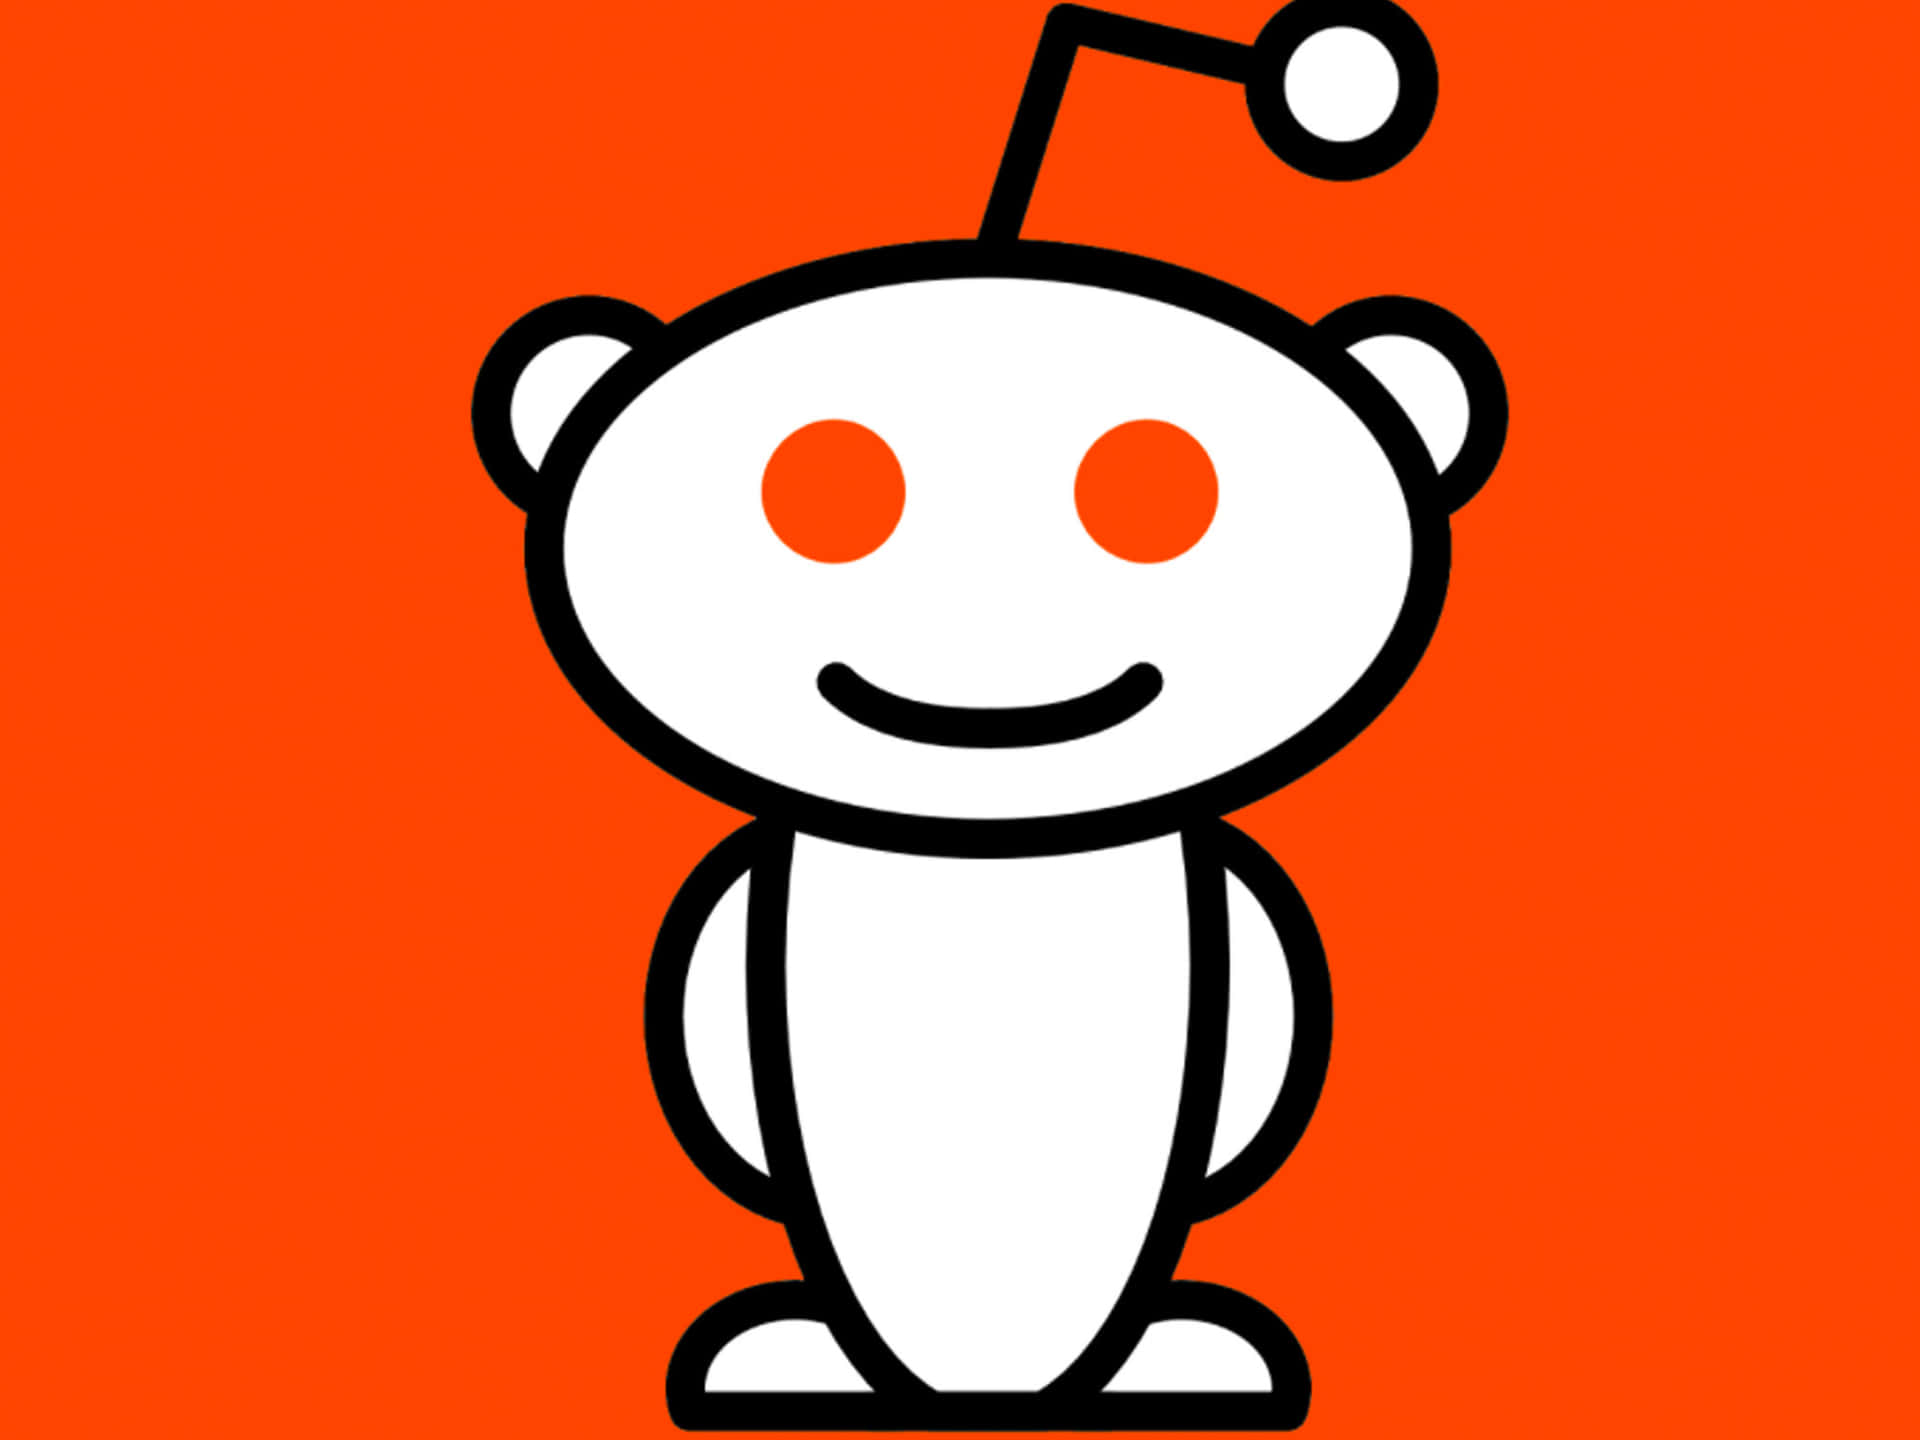 Engage and Connect with the Reddit Community